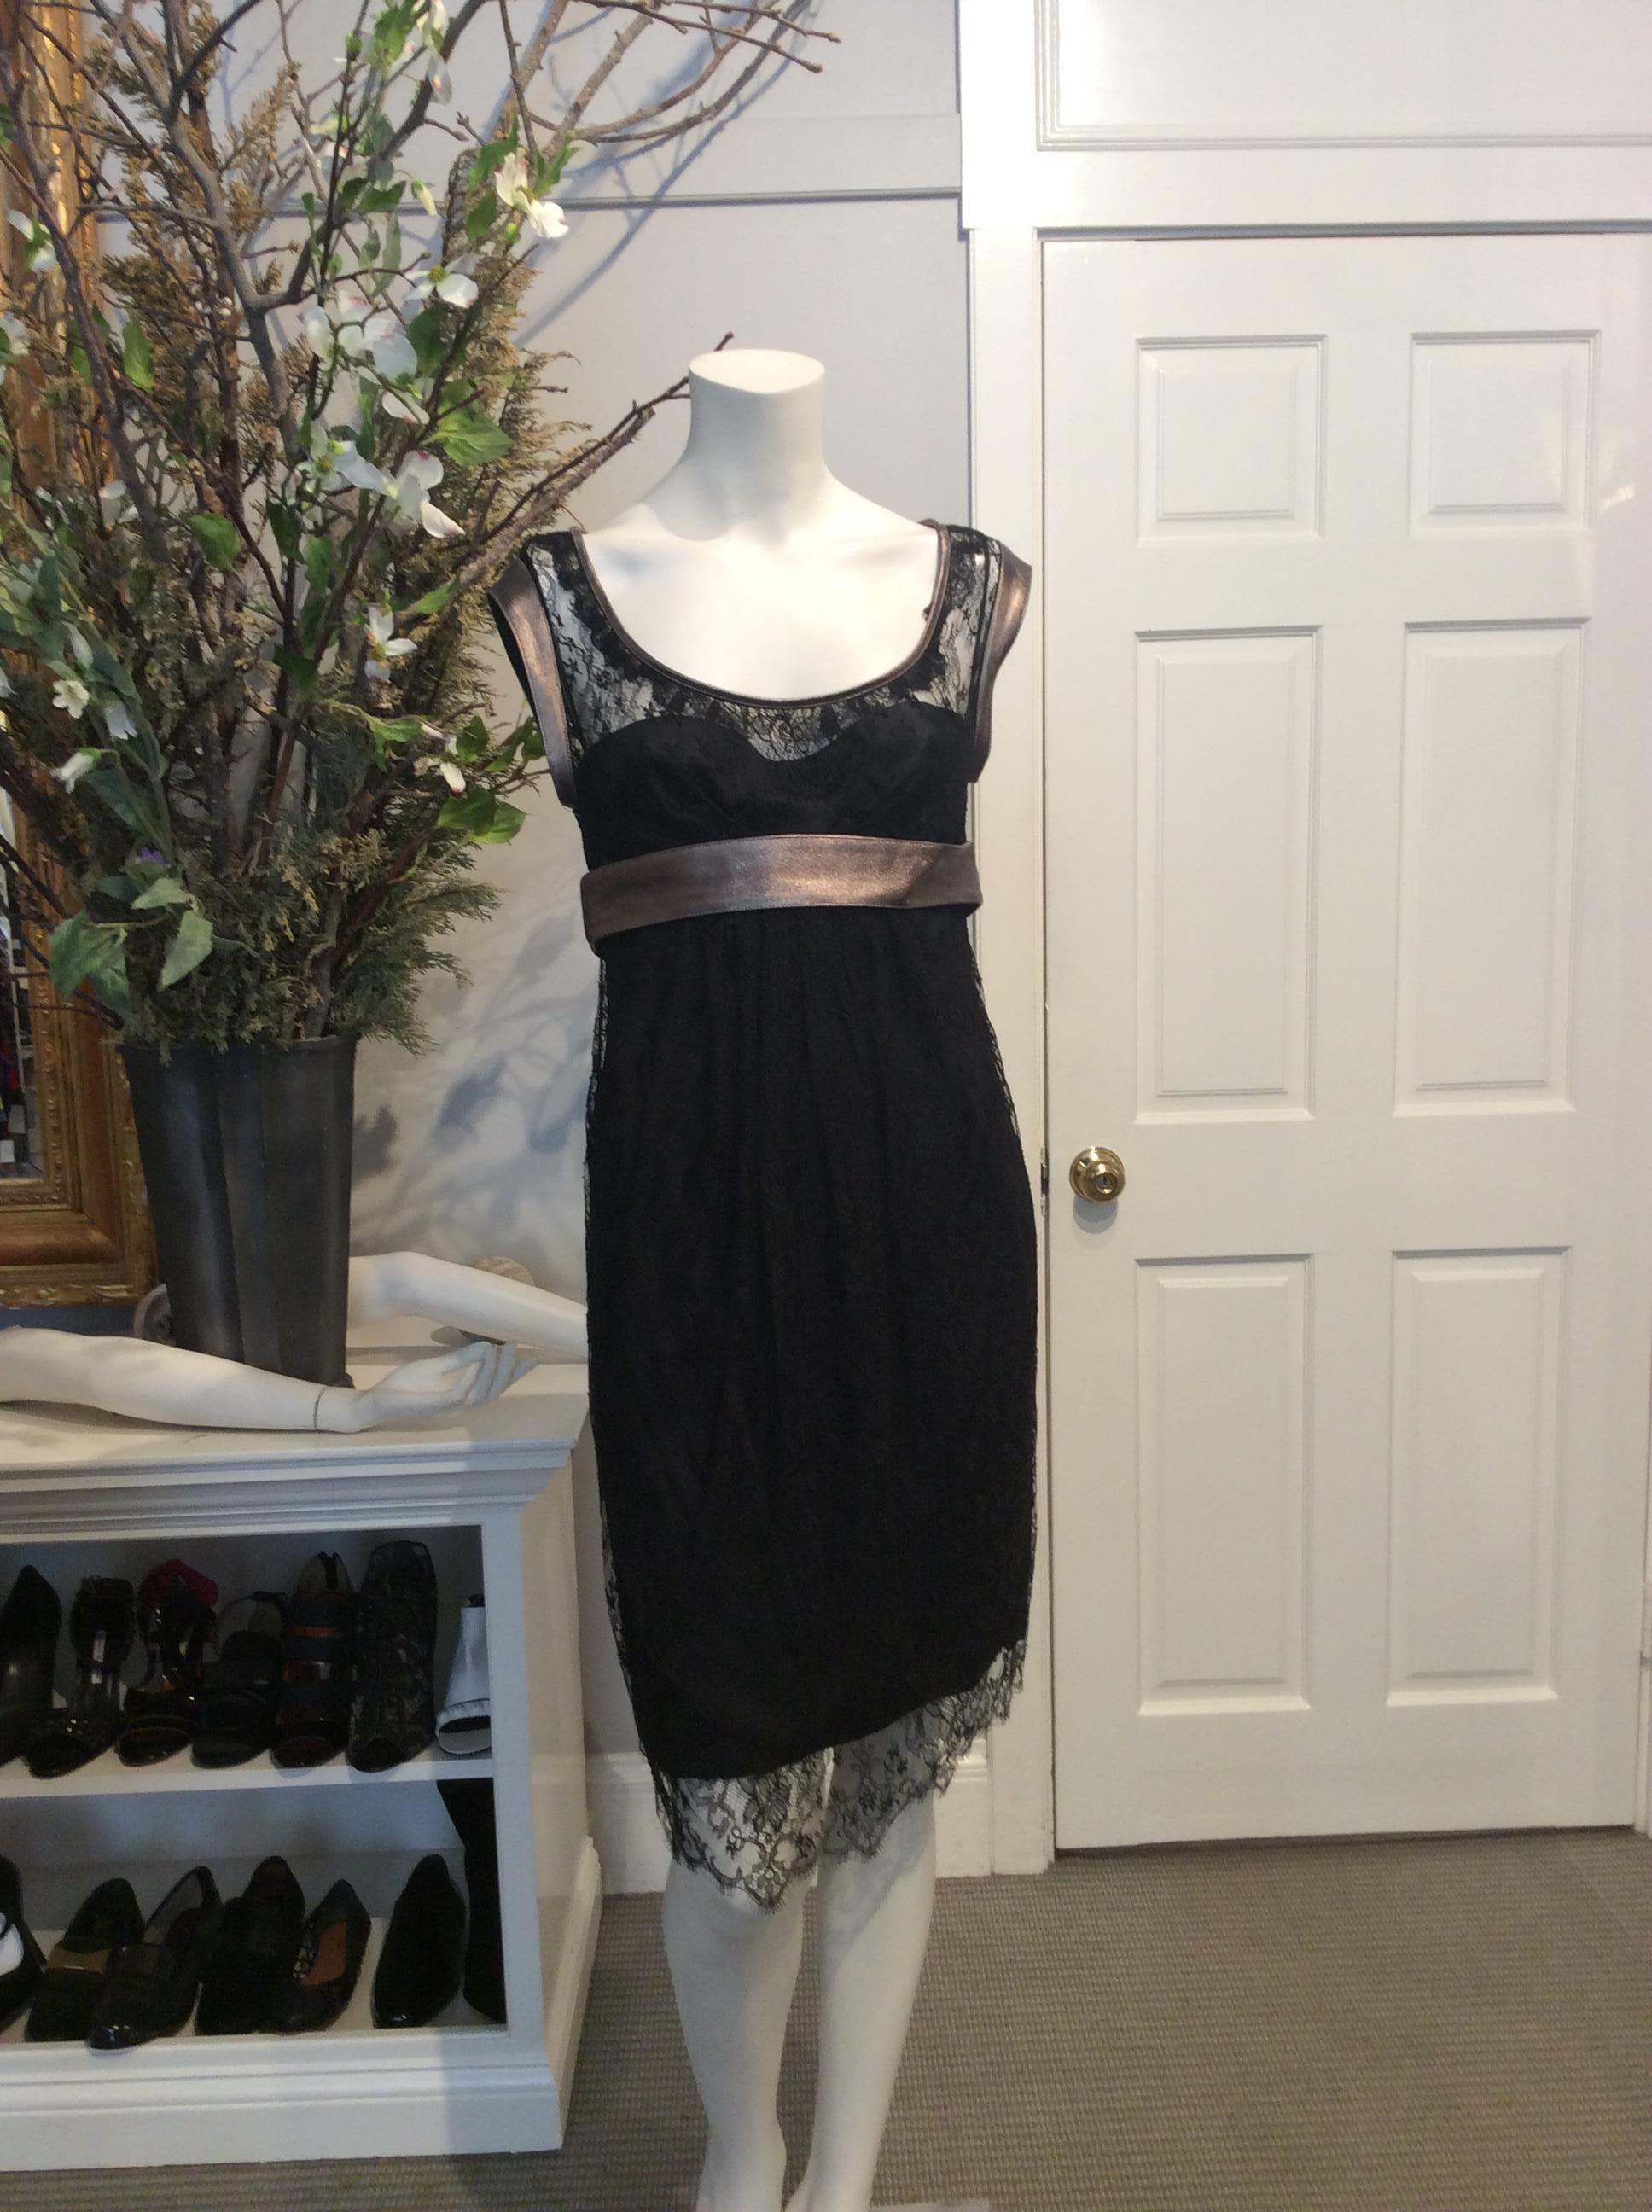 Black lace Dolce and Gabbana dress. Black silk slip dress/lining attached under lace. Gunmetal lambskin trim on neck and shoulders. Wide gunmetal lambskin belt at waist with two snap closures. Zipper located at back of dress with single hook and eye